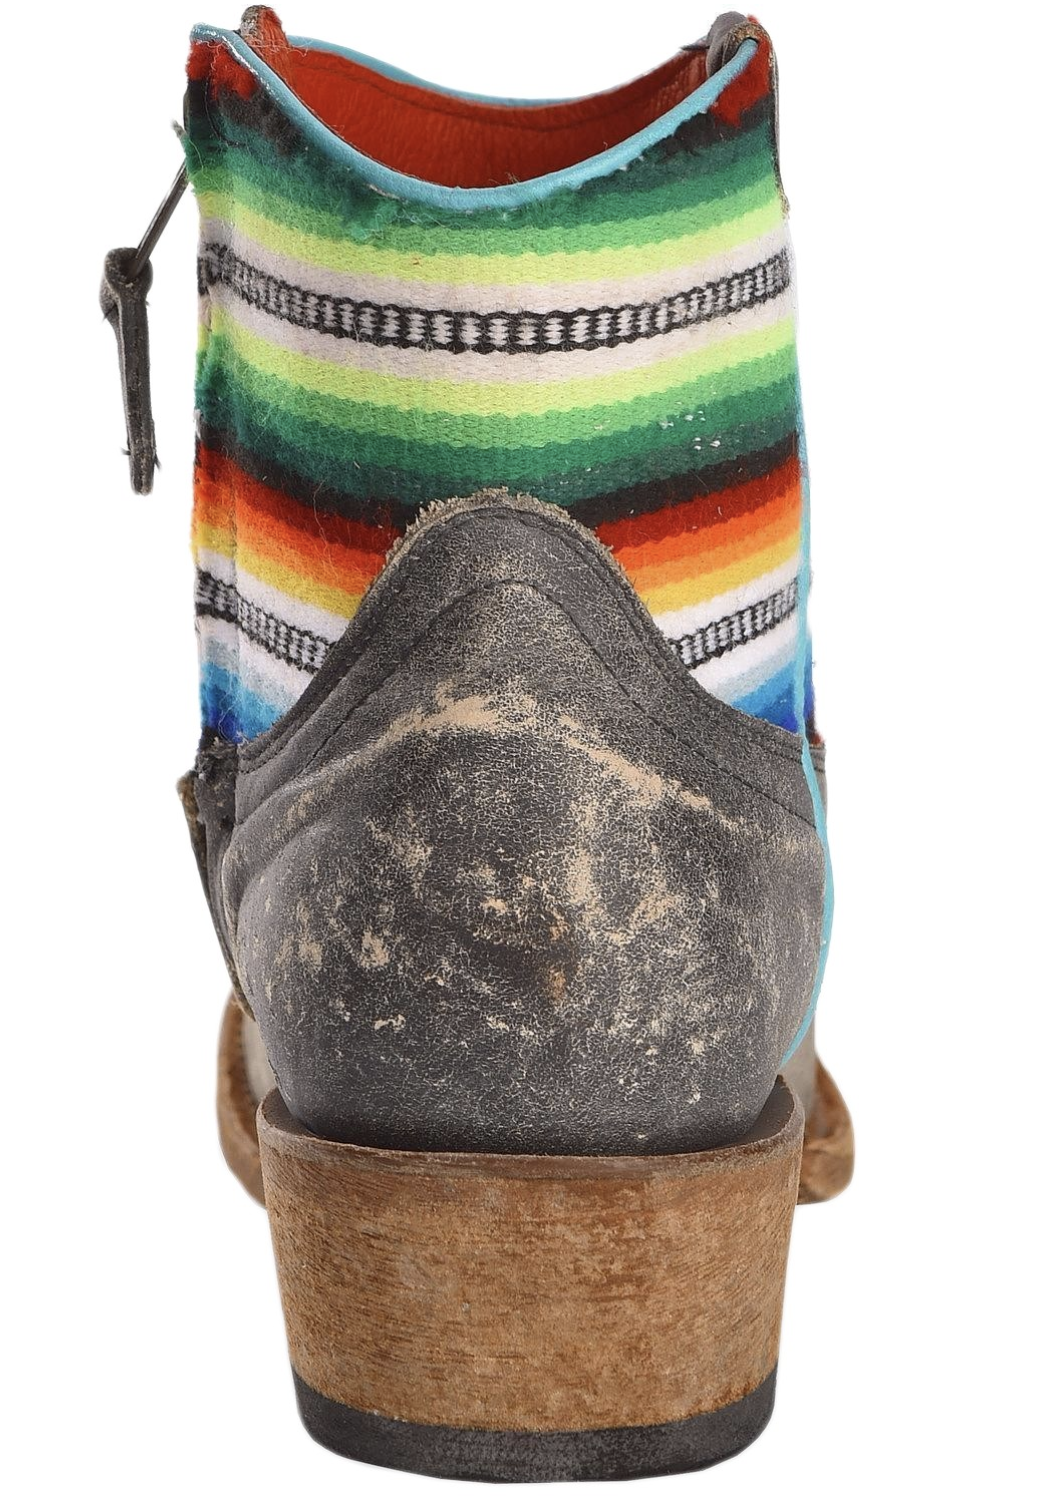 FIESTA CHIQUITA ROUNDED TOE ANKLE BOOTIE